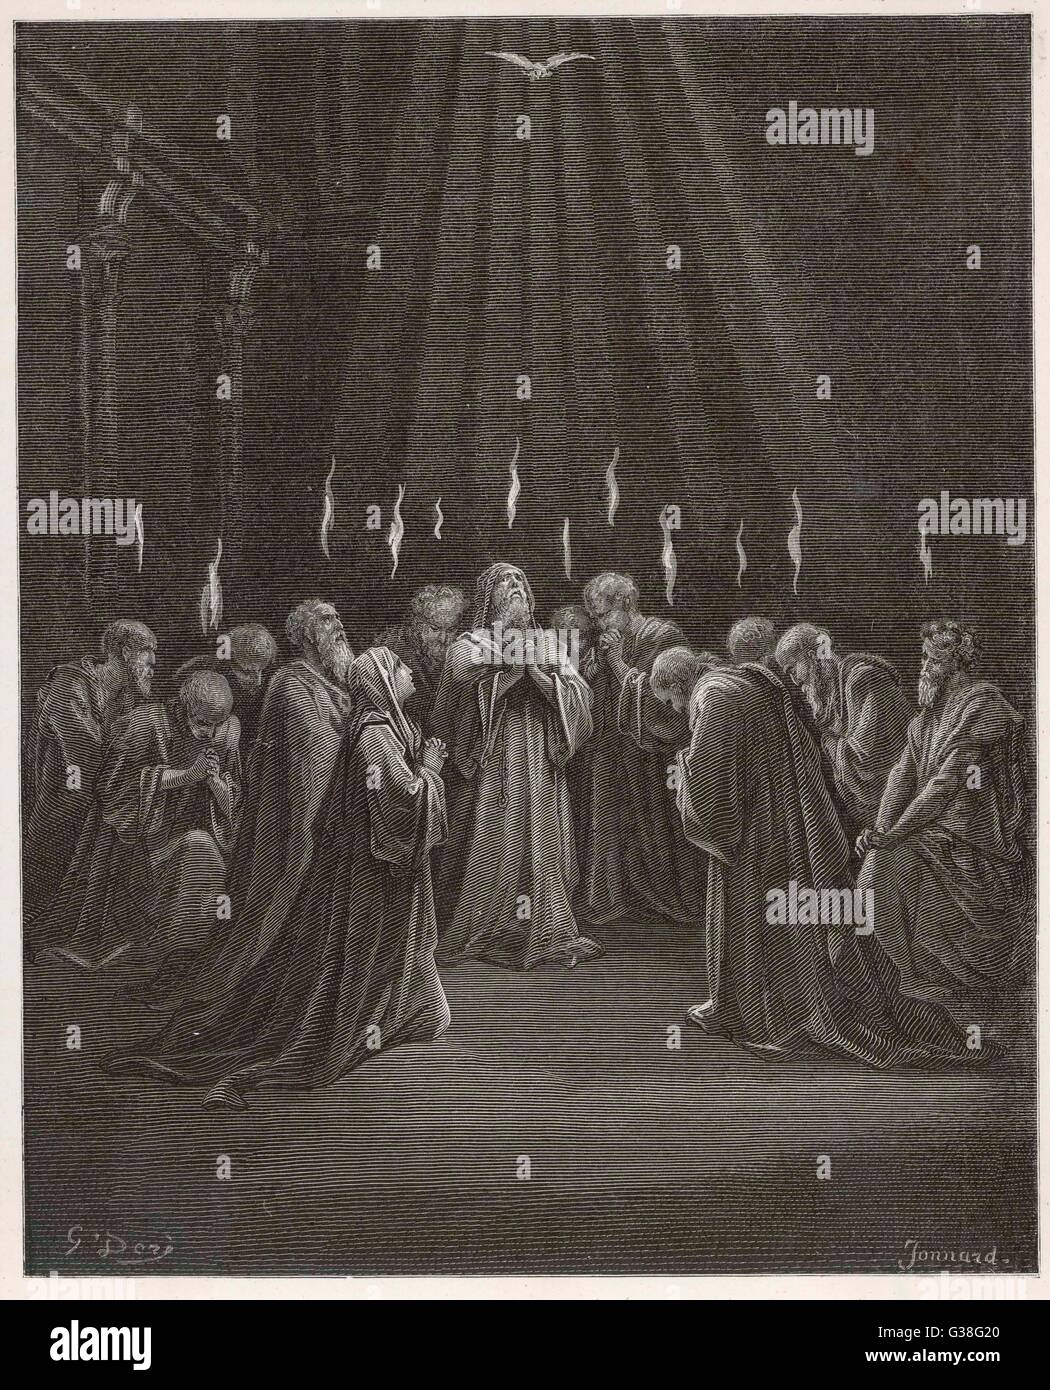 The Holy Spirit descends on the apostles, and their associates ('a ...